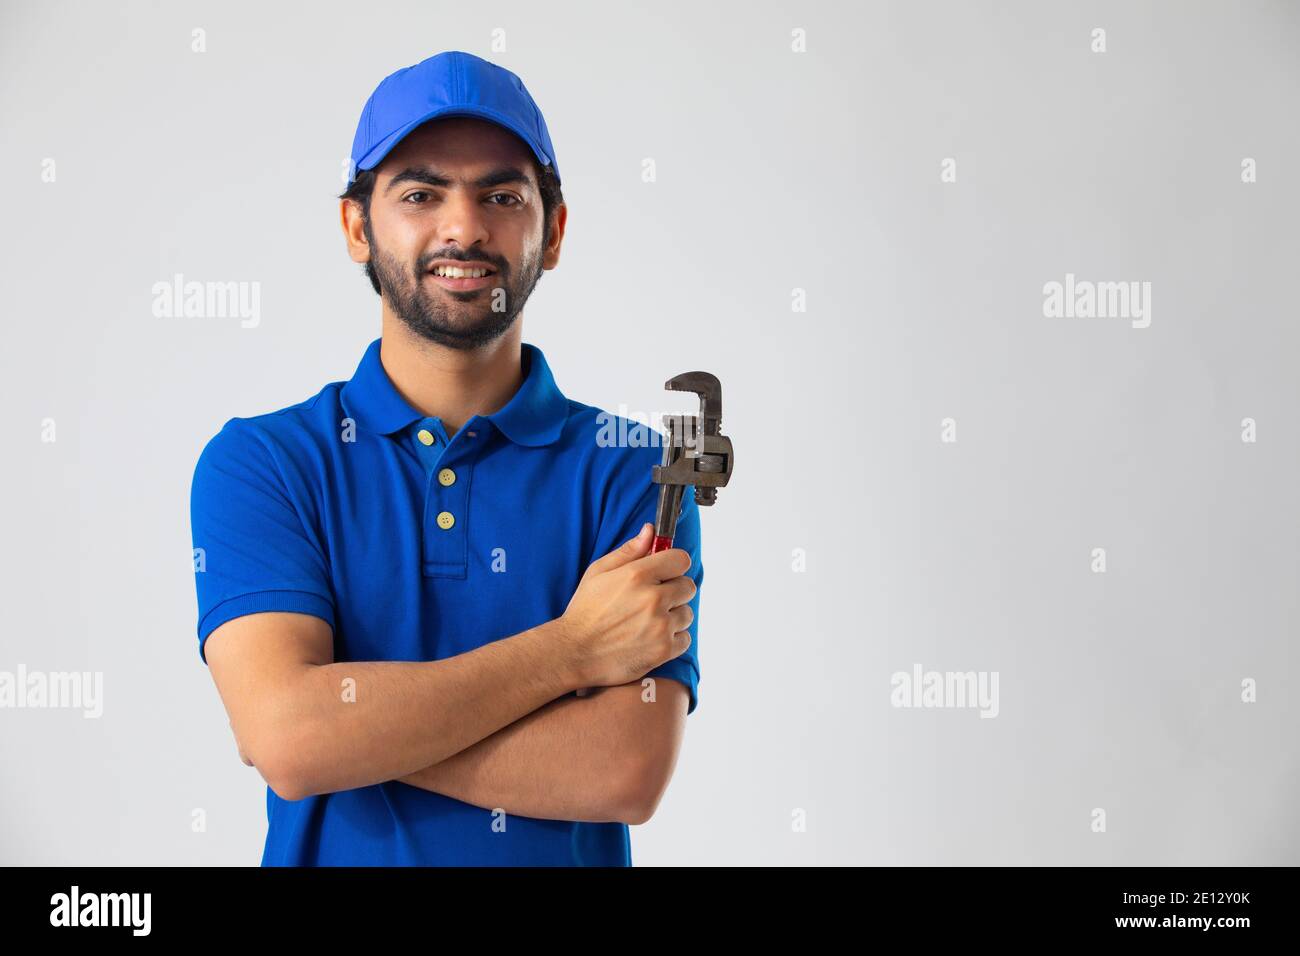 A PLUMBER SHOWING HIS EQUIPMENTS WHILE LOOKING AT CAMERA Stock Photo